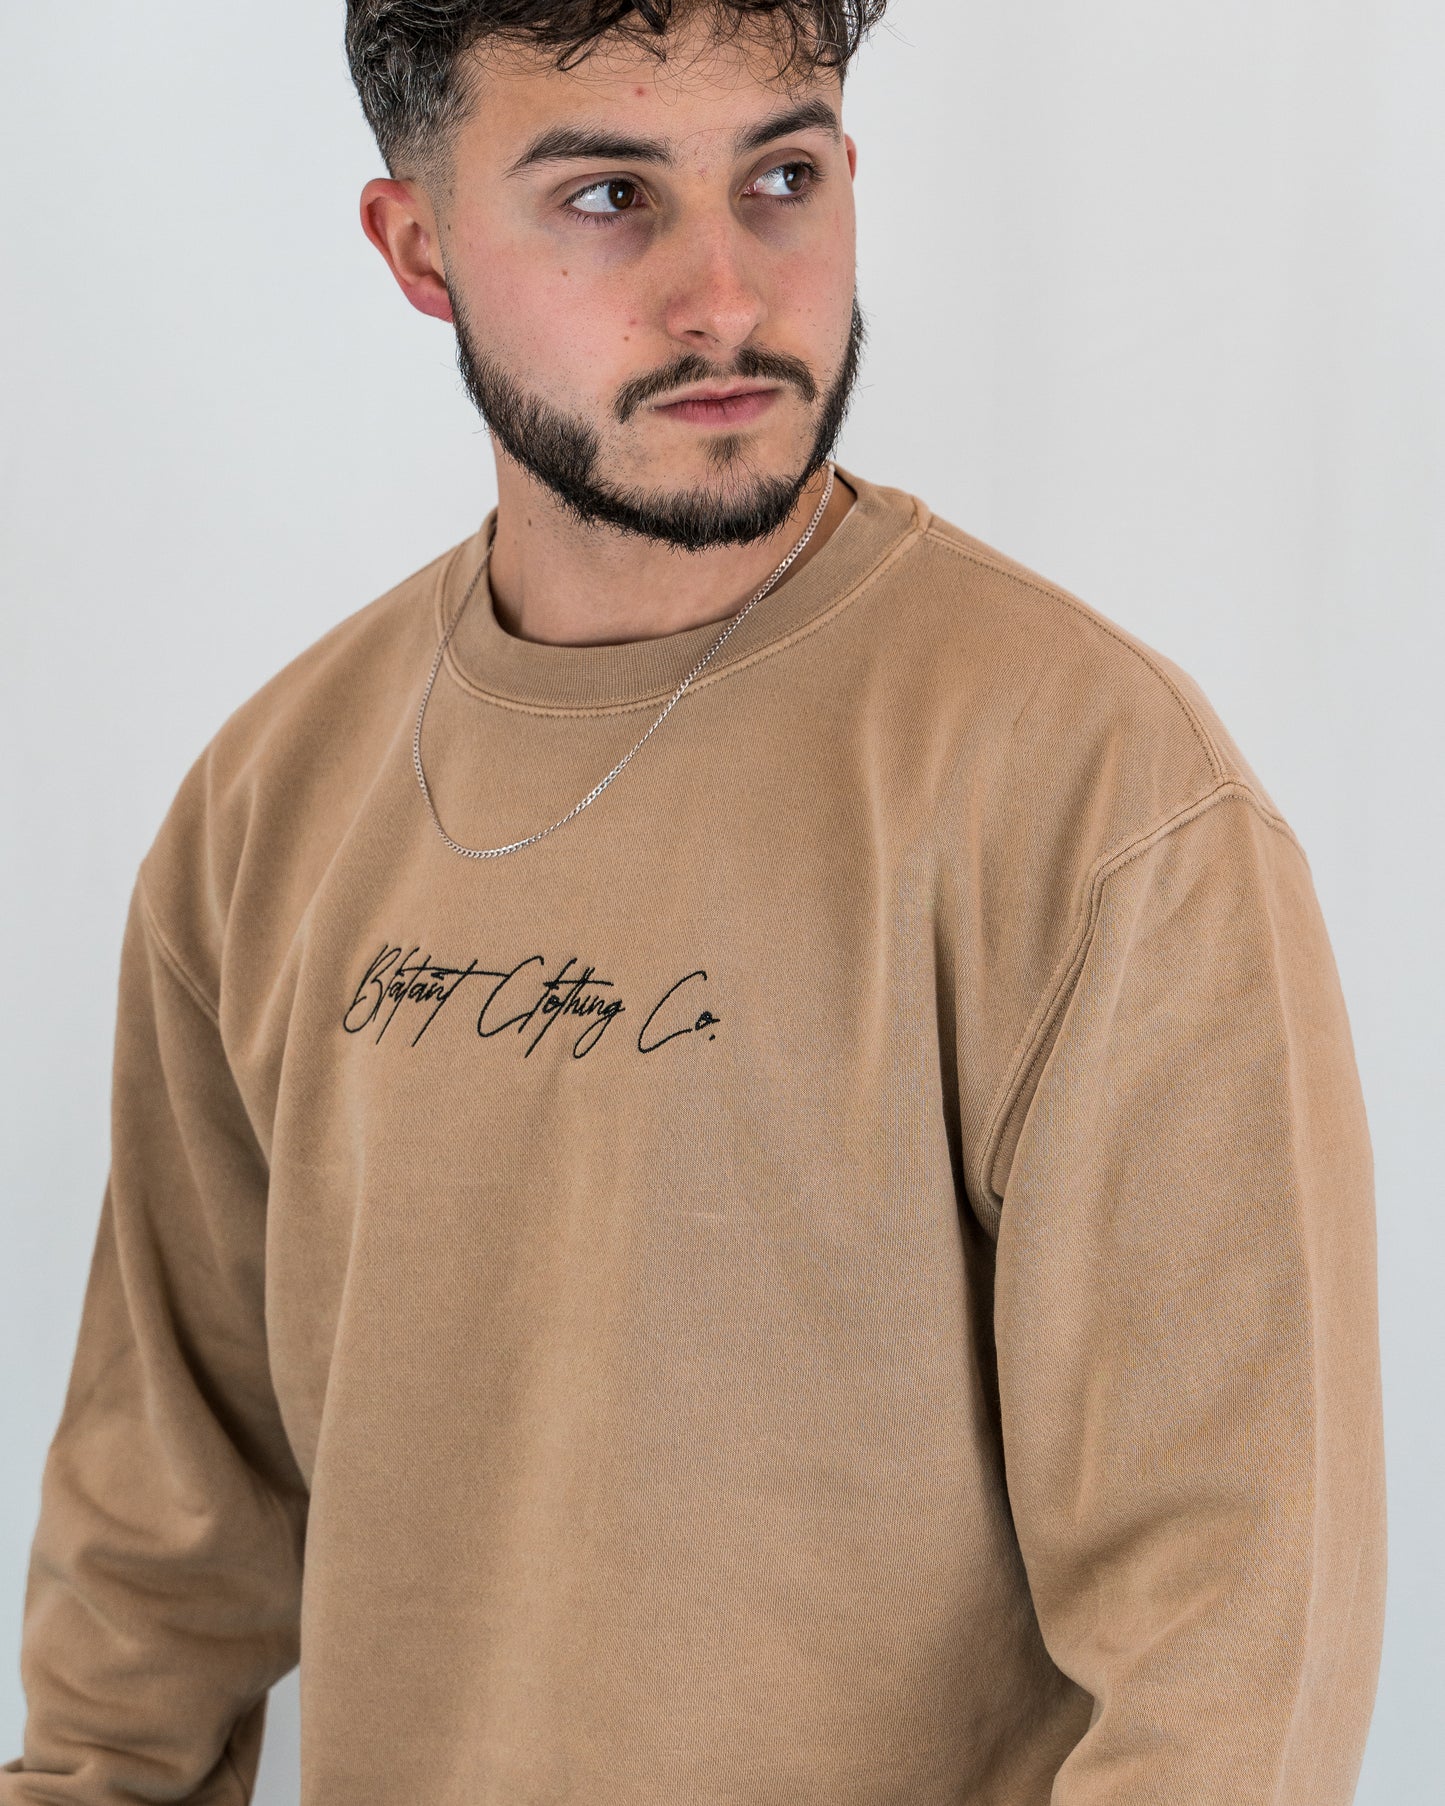 The Blatant Signature Embroidered Crew Neck